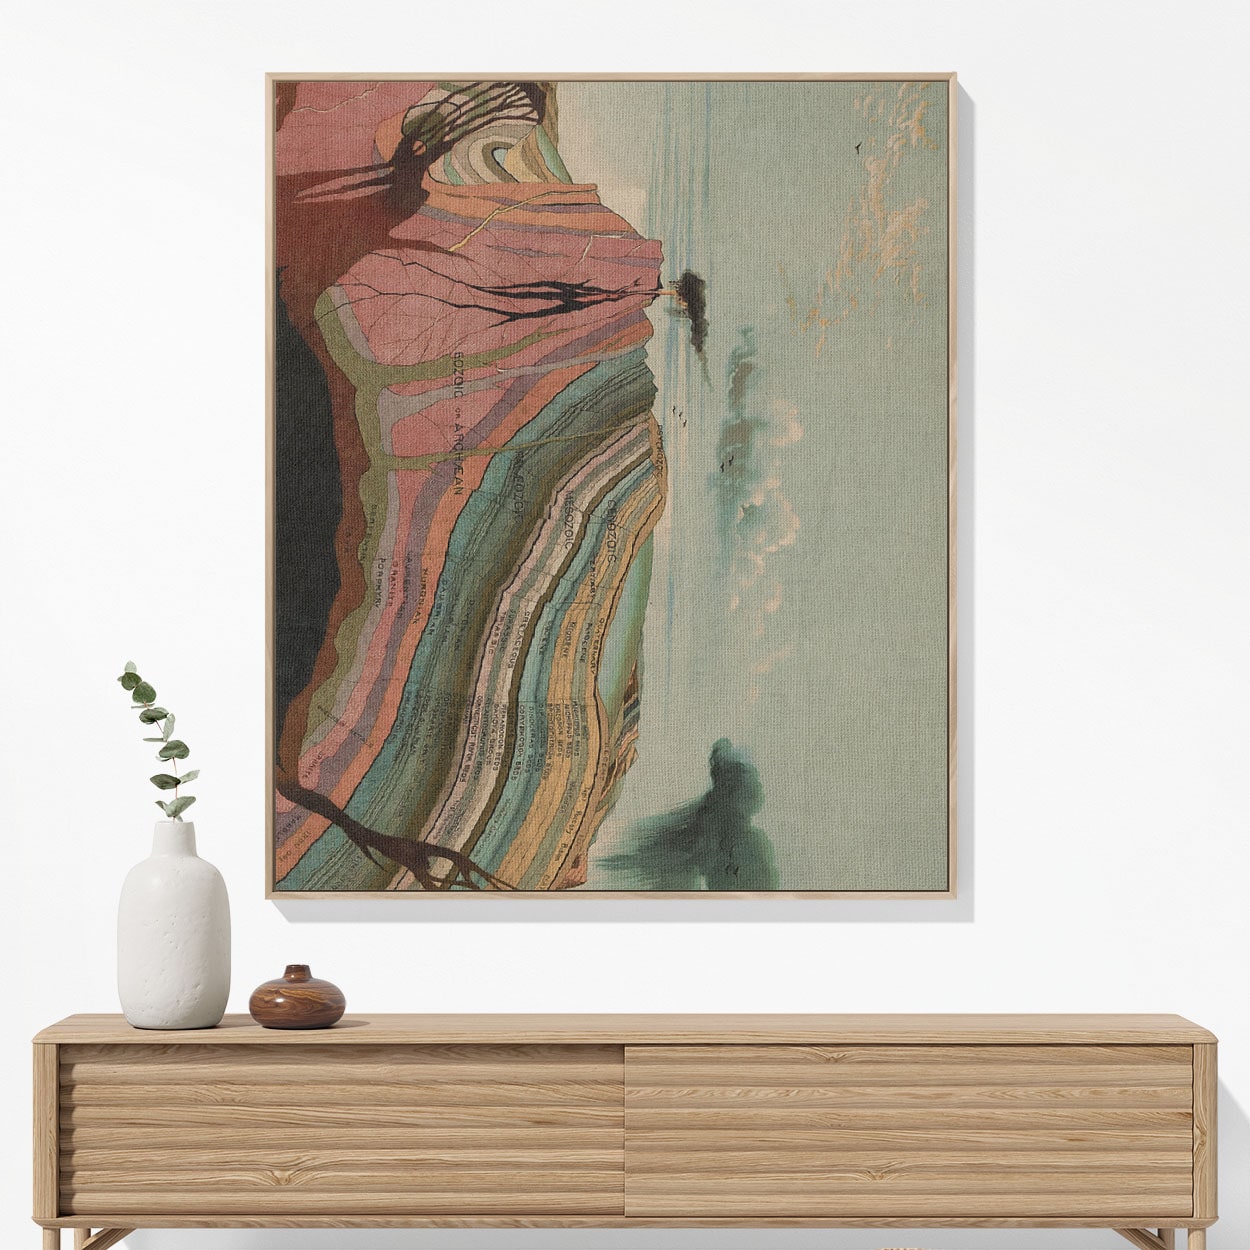 Layers of the Earth Woven Blanket Woven Blanket Hanging on a Wall as Framed Wall Art